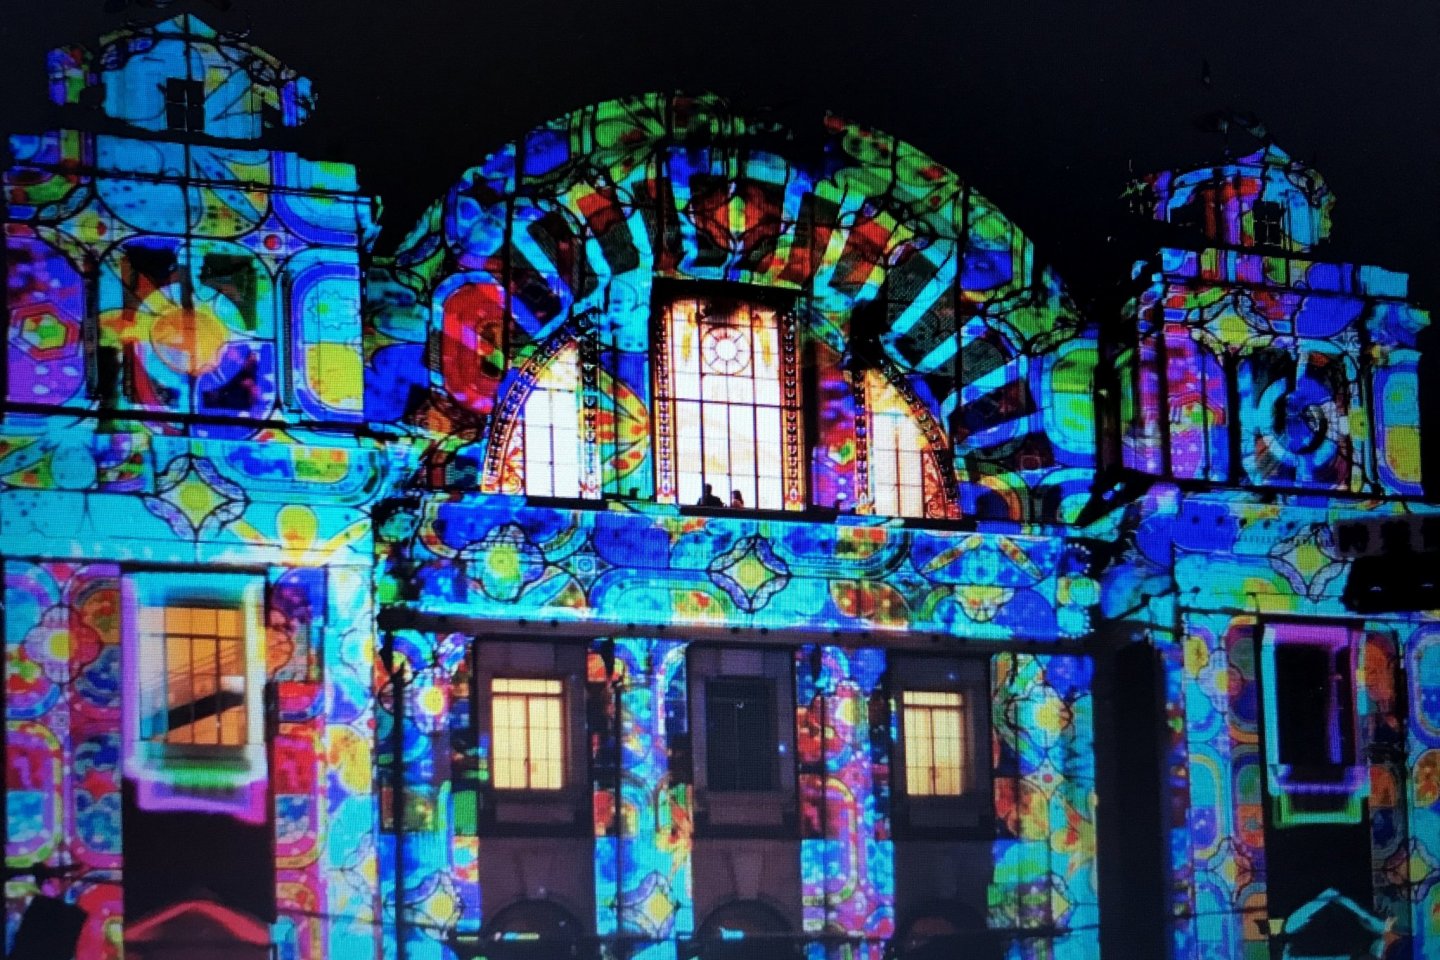 Projection Lighting in the historical Dojimahama art deco district